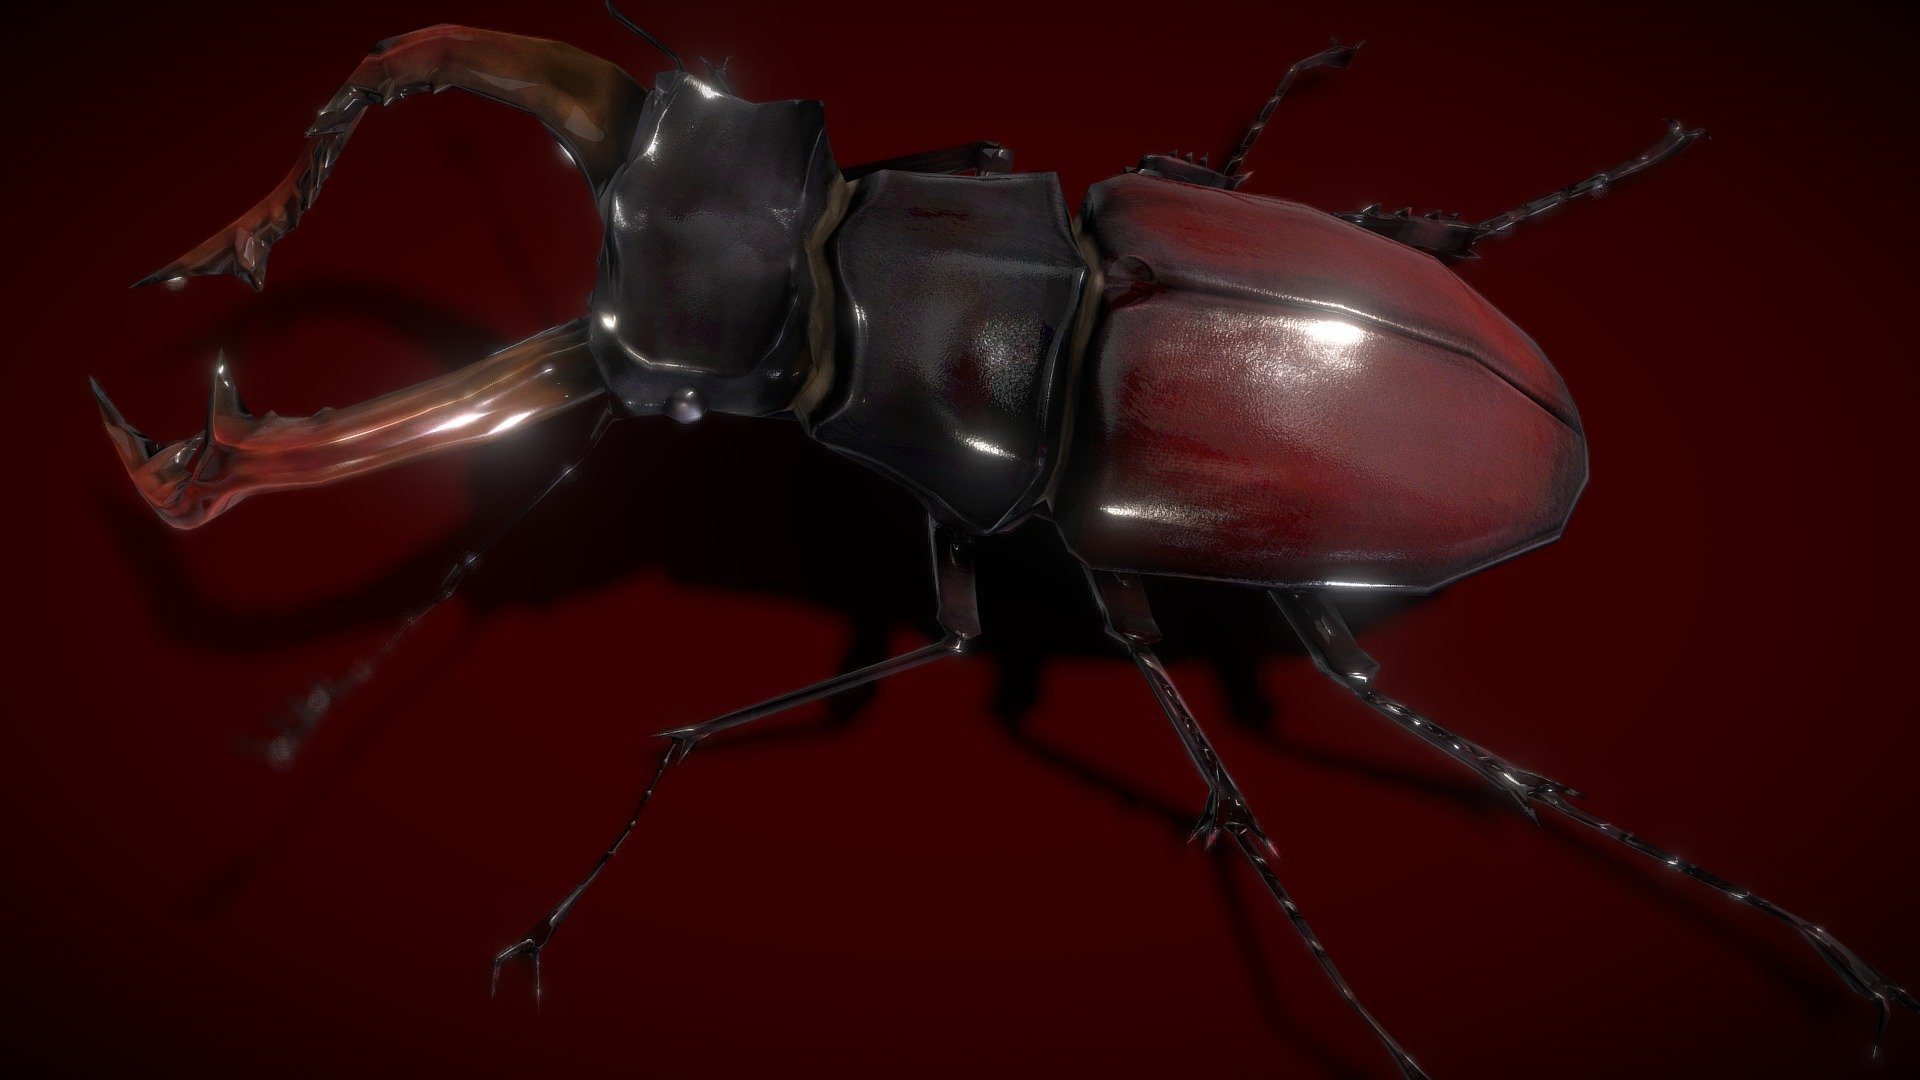 Realistic model of Stag Beetle. Suitable for use in advertising, design visualization, forensic presentation, film, animated movie, game cut scenes, etc.

Model created using 2dsmax and converted to 3Dmax, OBJ formats.  Topology optimized for smooth




Stag Beetle: 1348 polys , 2100 Tris

Included texture maps: Color/diffise 1024X1024 Bump 1024X1024 Specula 1024X1024 Reflectivity 1024X1024
 - Stag Beetle Lowpolys 3D - Buy Royalty Free 3D model by vustudios 3d model